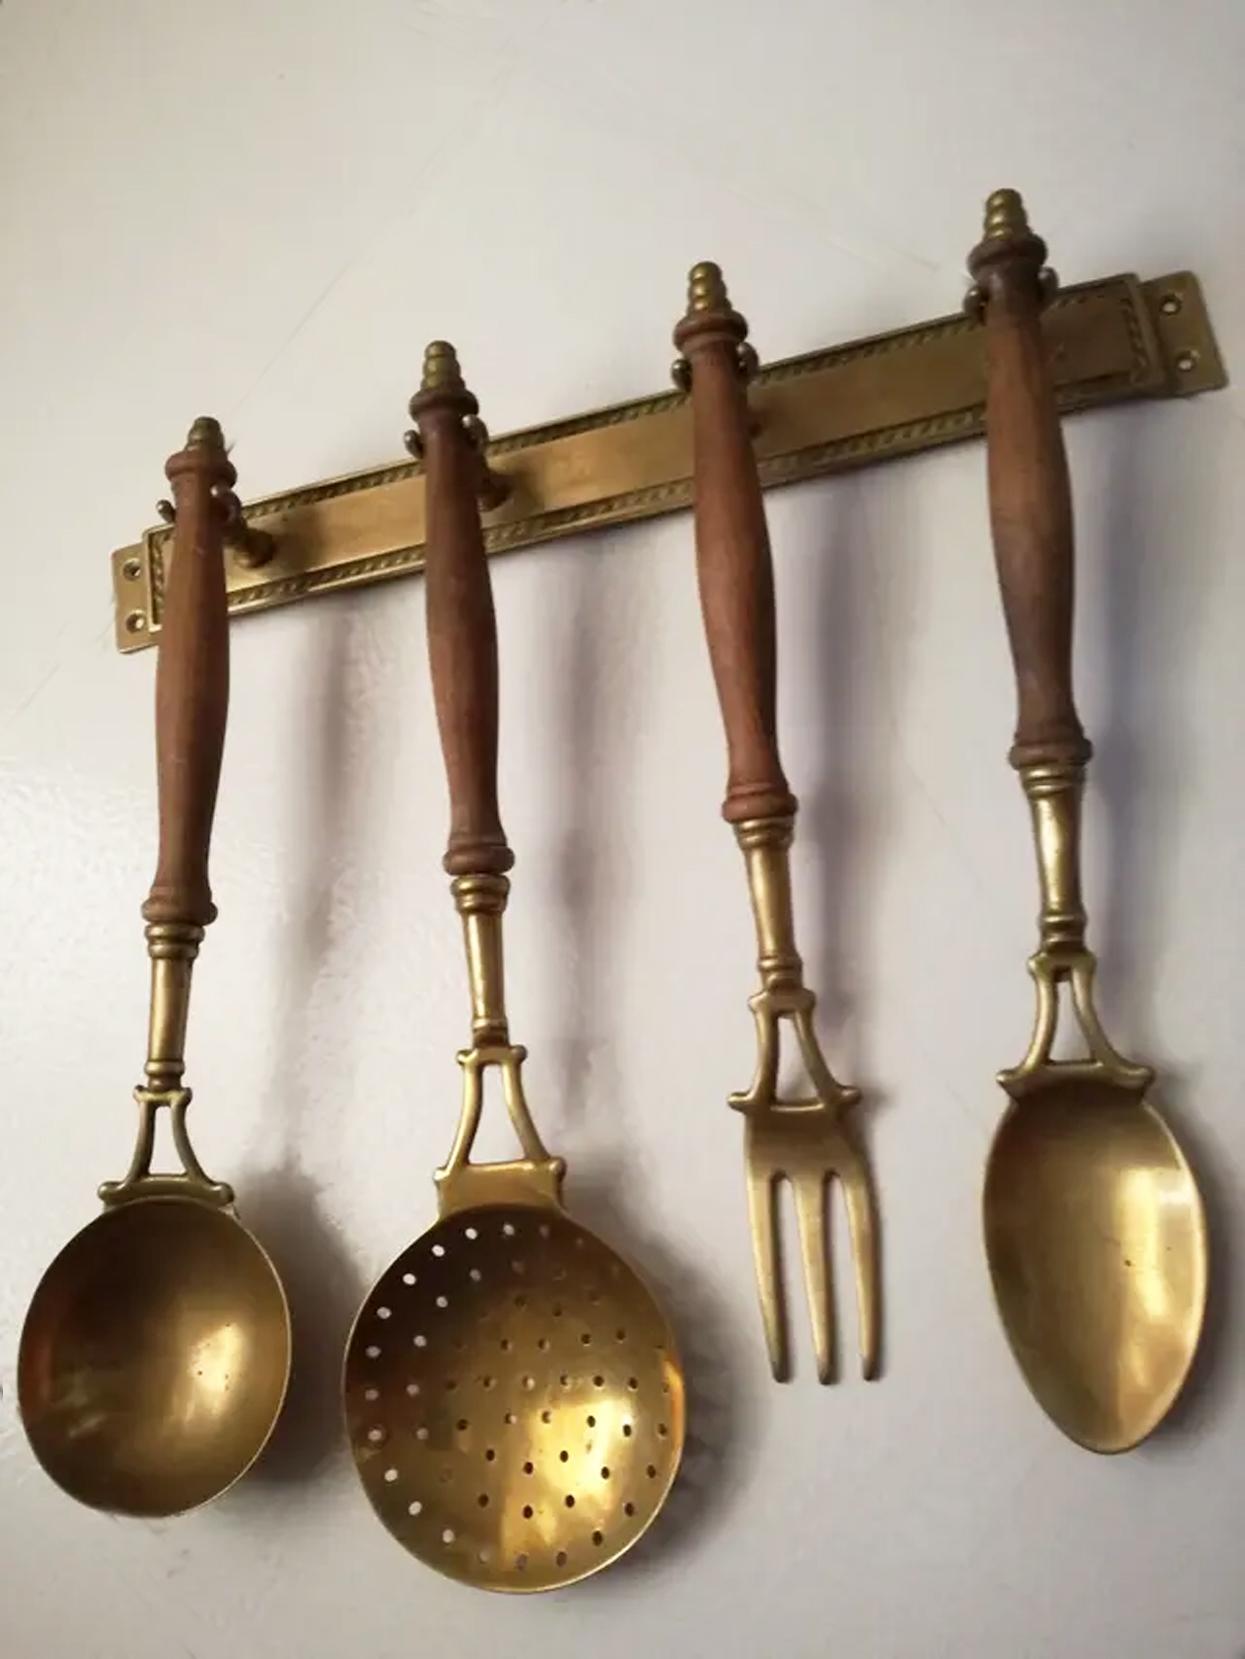 Art Nouveau Kitchen Utensils Made of Brass with Hanging Bar, Early 20th Century